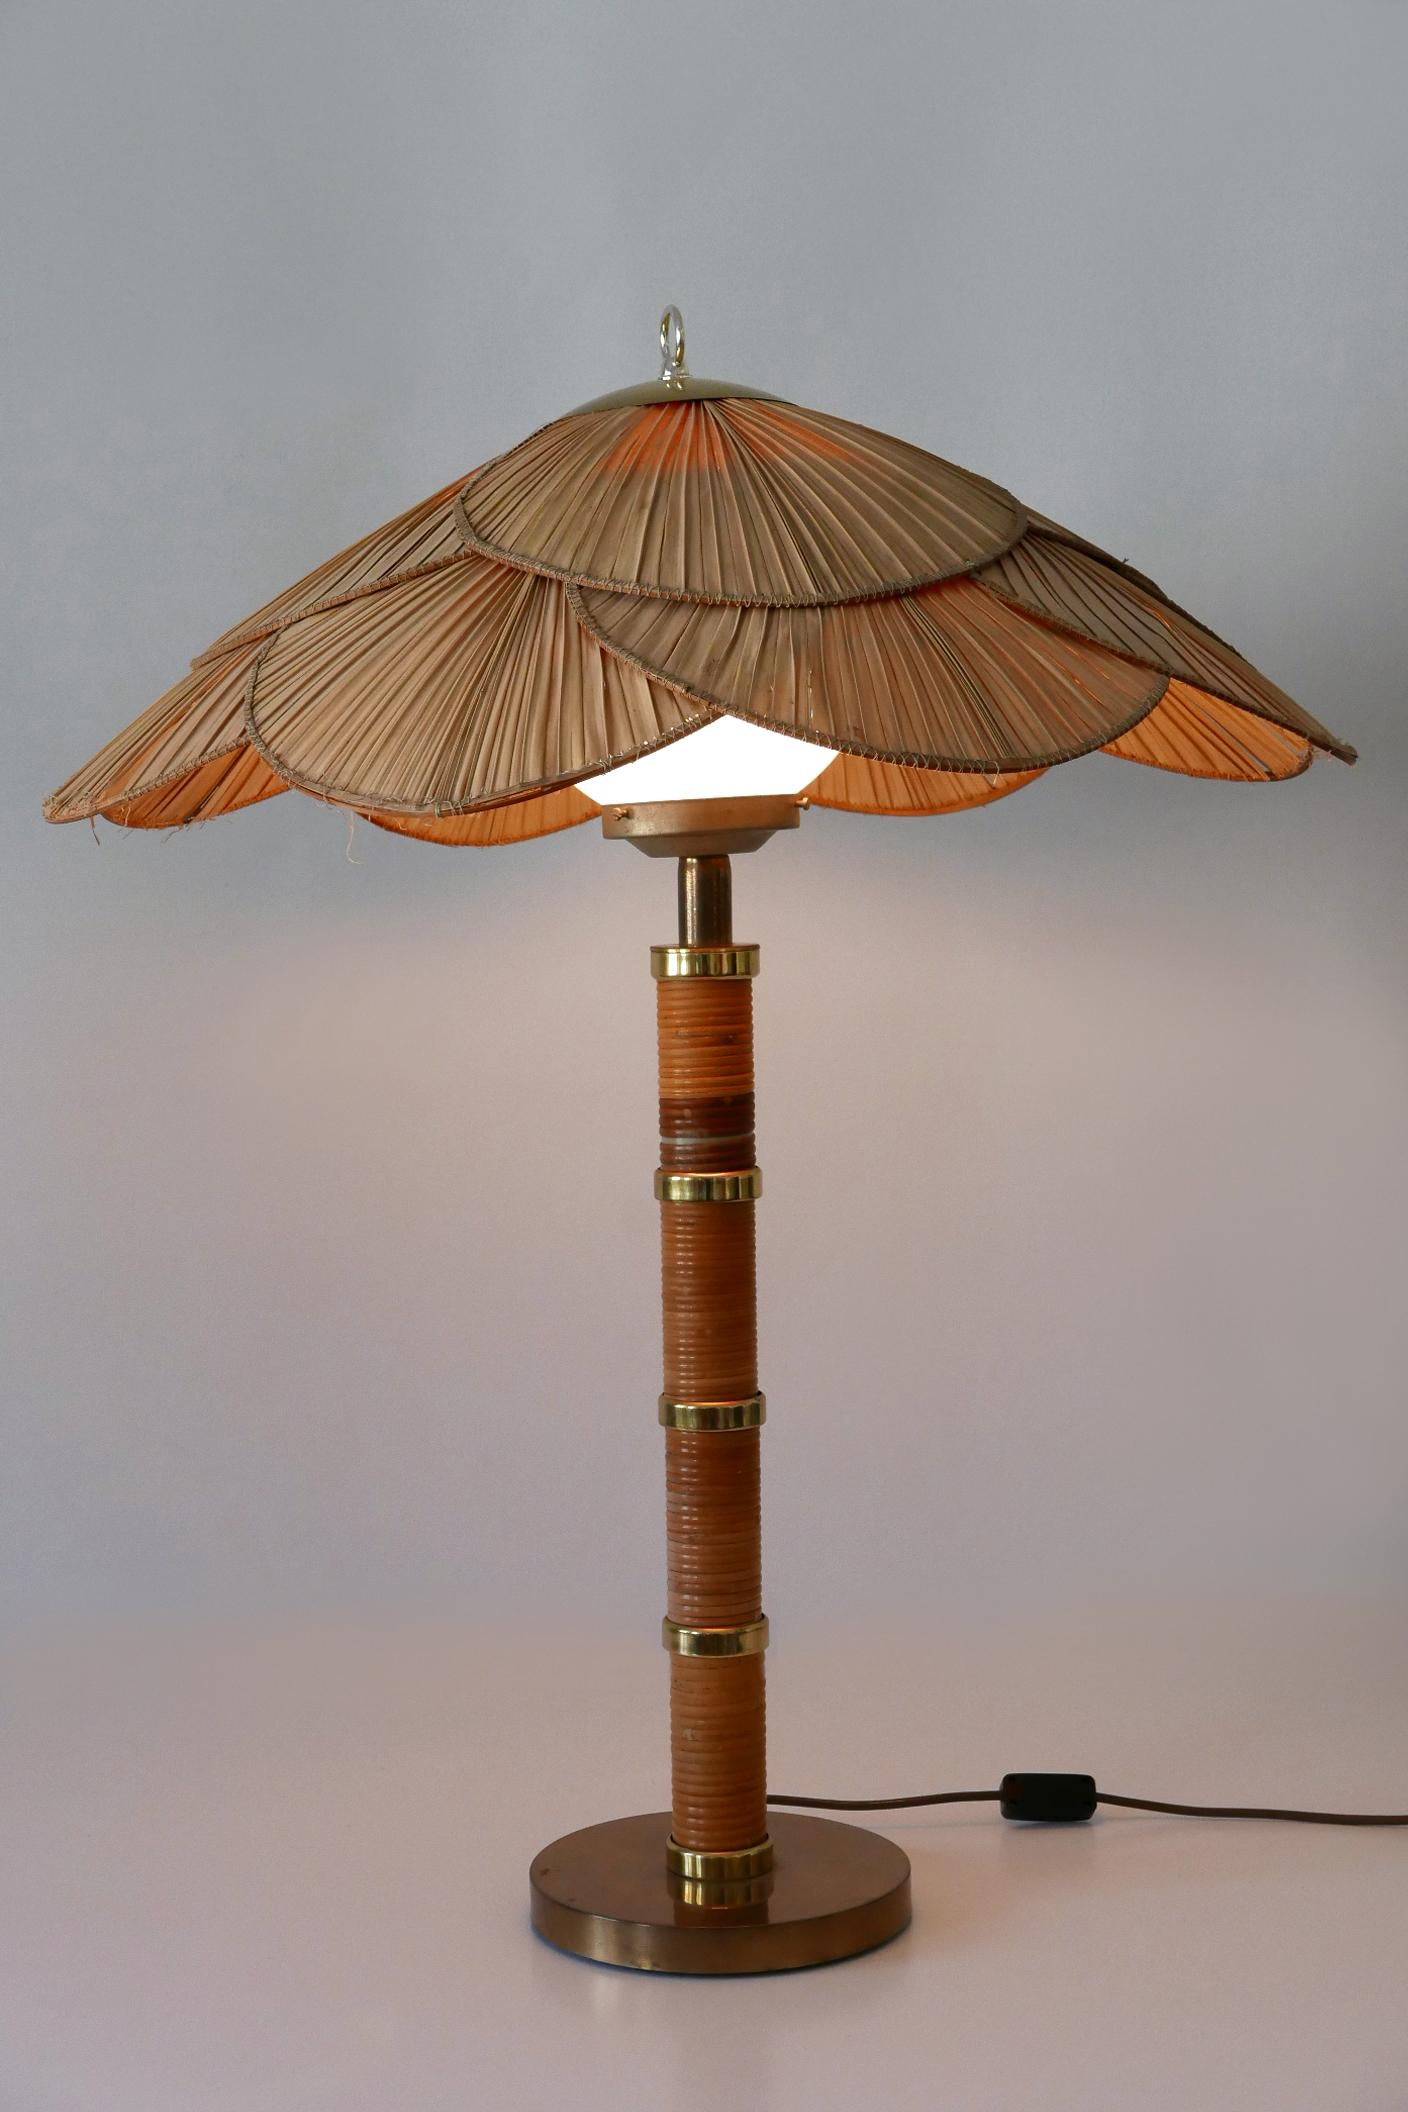 Large, extremely rare and highly decorative Mid-Century Modern 'Uchiwa' table lamp or floor light. Designed & 3anufactured by Miranda AB, Sweden, 1960s.

Executed in brass, opaline glass, wicker and palm leafs, the table / floor lamp needs 1 x E27 /